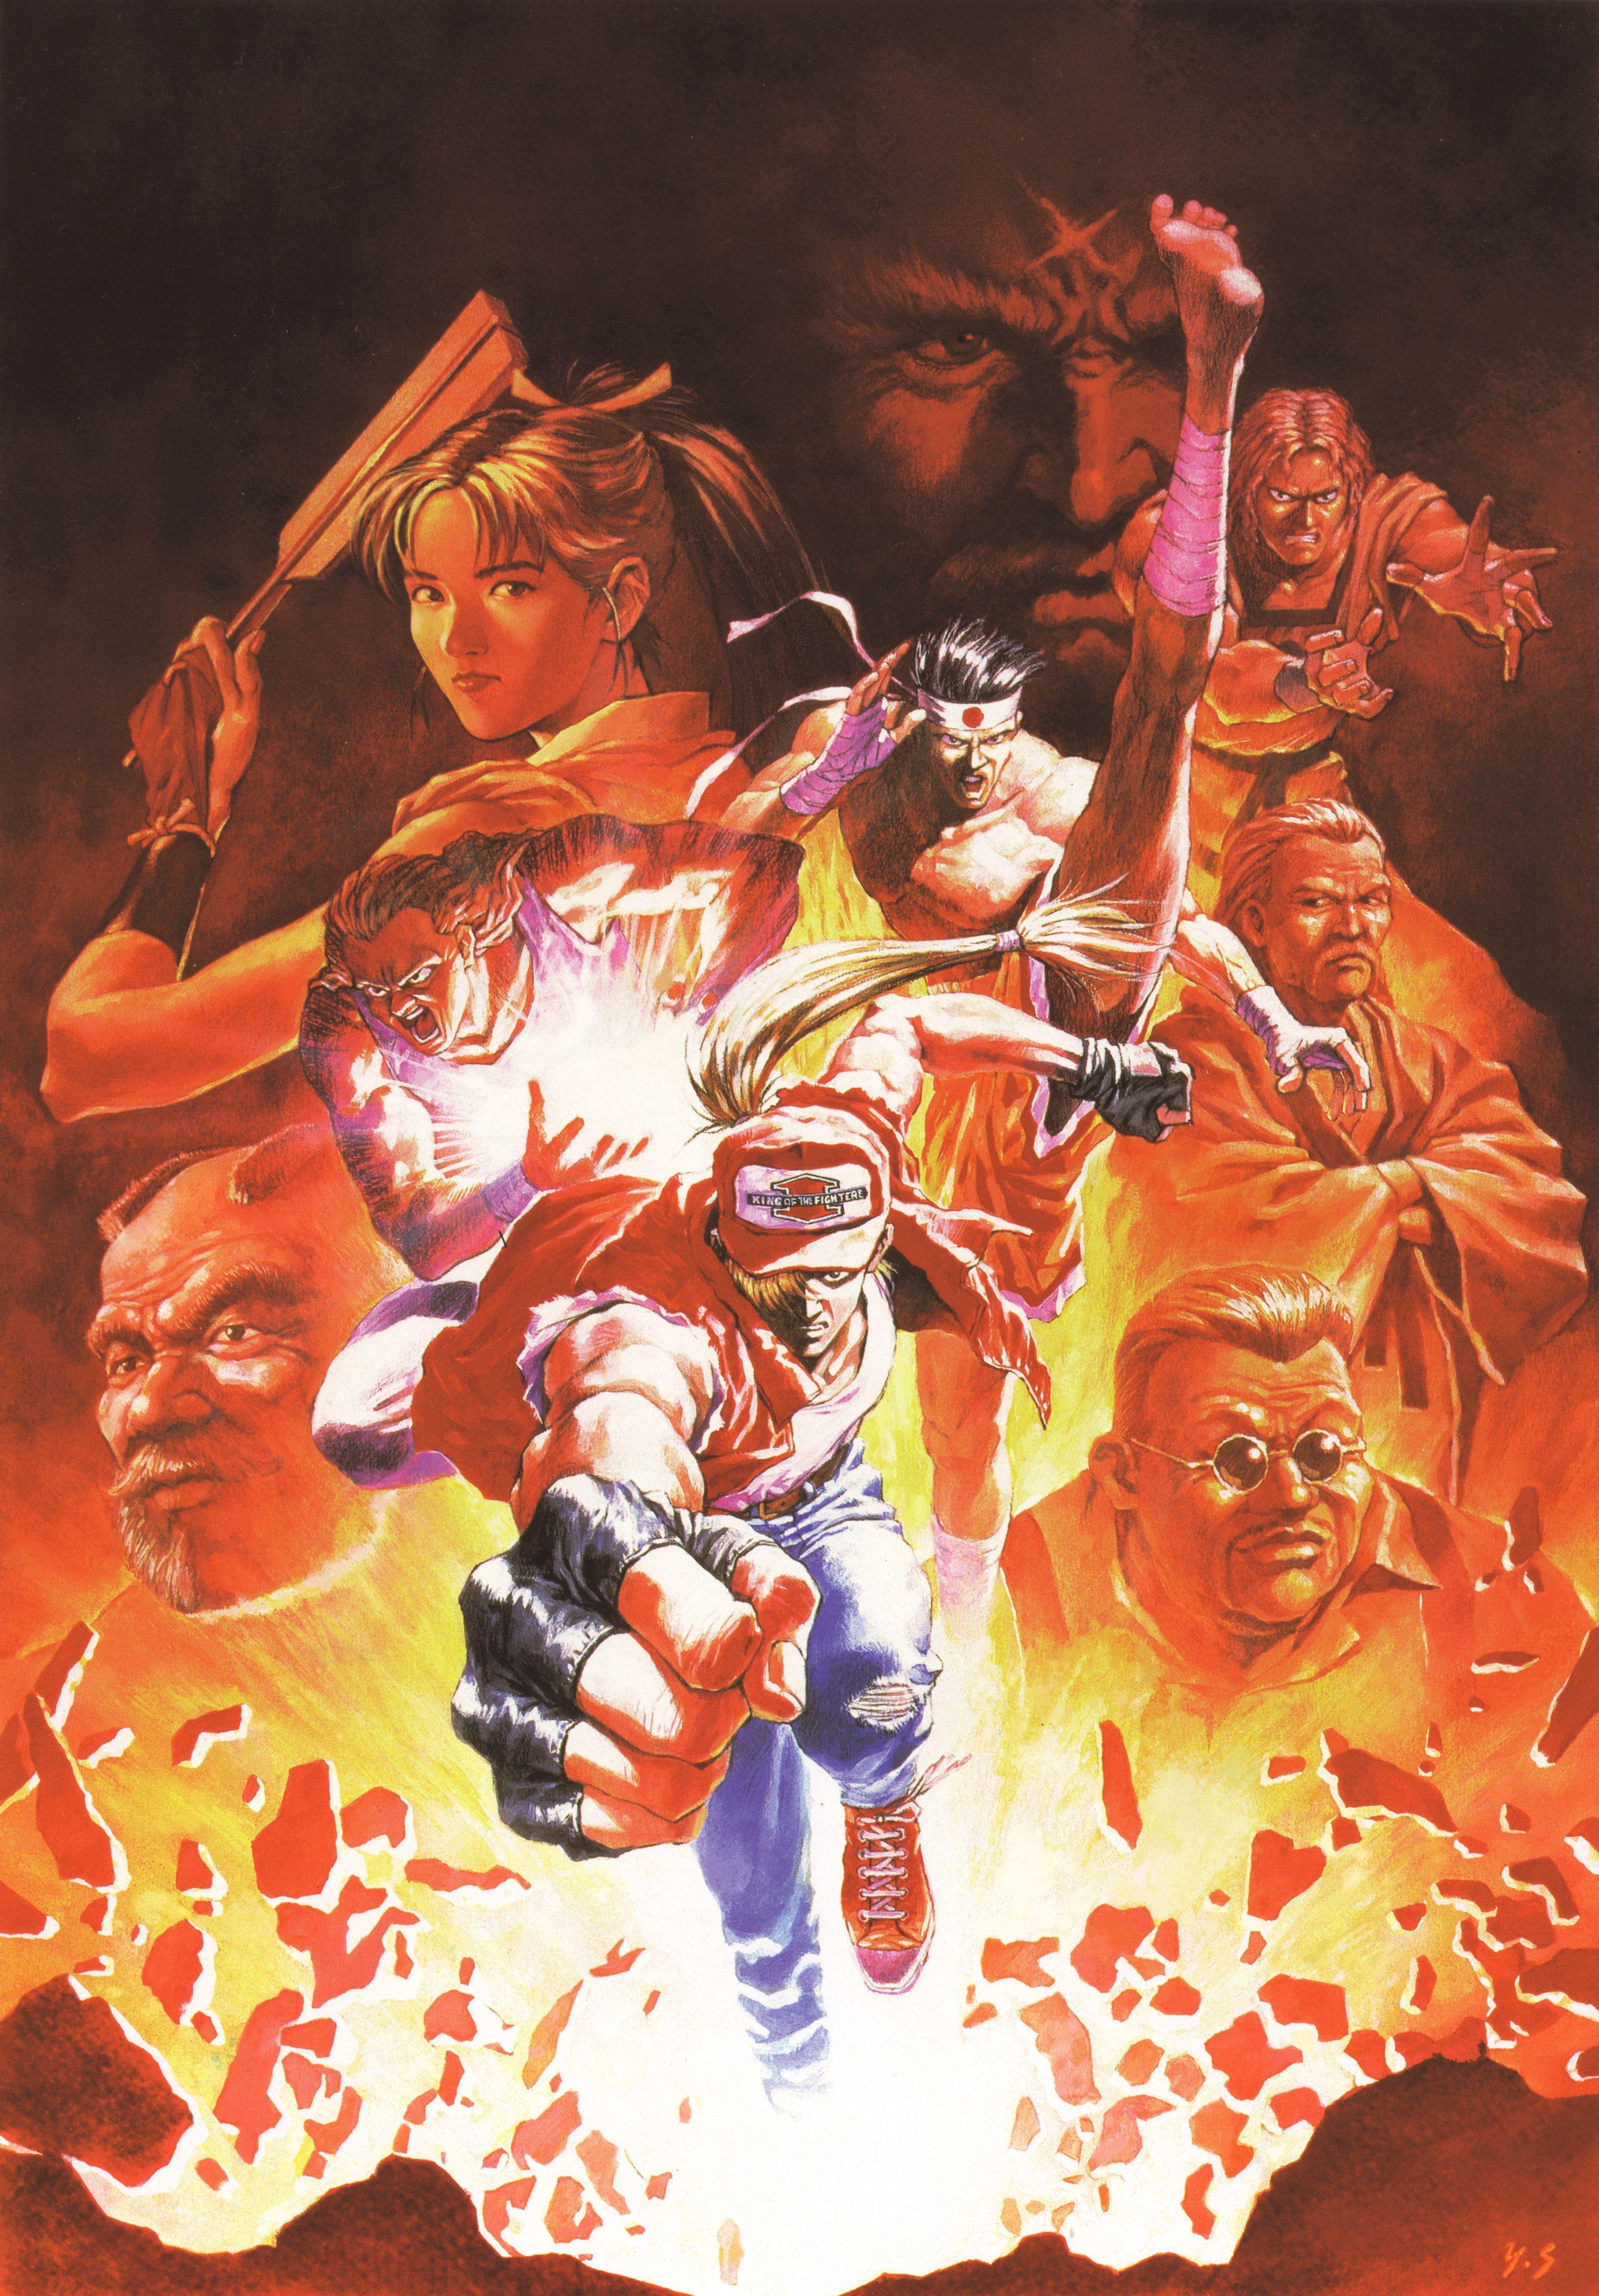 Fatal Fury Wallpapers - Top Free Fatal Fury Backgrounds ...